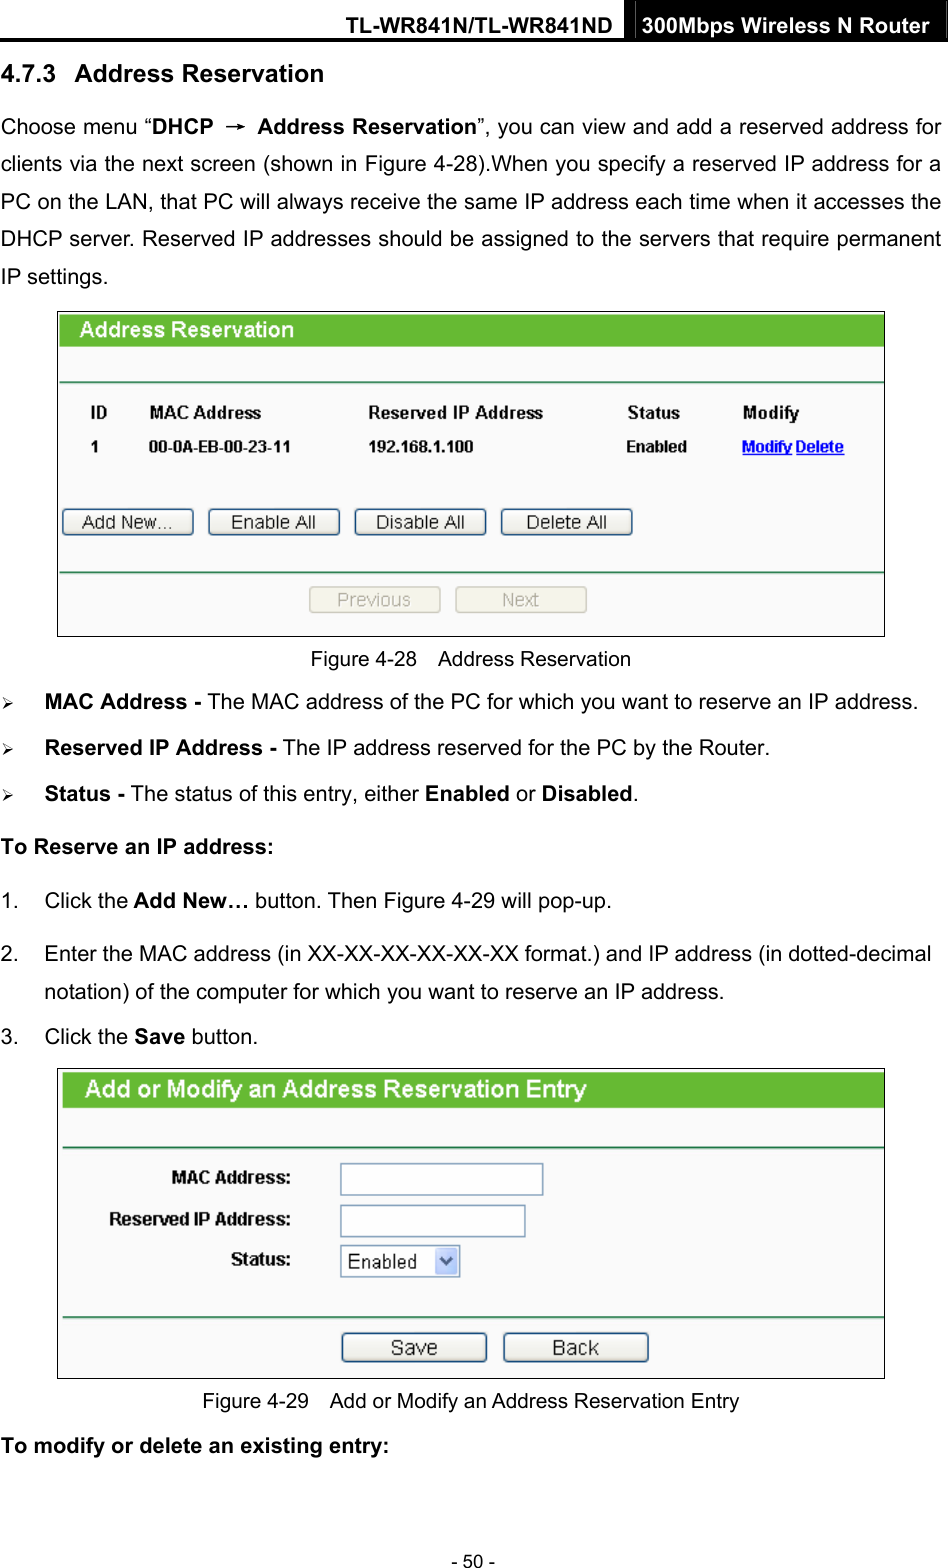 TL-WR841N/TL-WR841ND 300Mbps Wireless N Router - 50 - 4.7.3  Address Reservation Choose menu “DHCP  → Address Reservation”, you can view and add a reserved address for clients via the next screen (shown in Figure 4-28).When you specify a reserved IP address for a PC on the LAN, that PC will always receive the same IP address each time when it accesses the DHCP server. Reserved IP addresses should be assigned to the servers that require permanent IP settings.    Figure 4-28  Address Reservation ¾ MAC Address - The MAC address of the PC for which you want to reserve an IP address. ¾ Reserved IP Address - The IP address reserved for the PC by the Router. ¾ Status - The status of this entry, either Enabled or Disabled. To Reserve an IP address:  1. Click the Add New… button. Then Figure 4-29 will pop-up. 2.  Enter the MAC address (in XX-XX-XX-XX-XX-XX format.) and IP address (in dotted-decimal notation) of the computer for which you want to reserve an IP address.   3. Click the Save button.    Figure 4-29    Add or Modify an Address Reservation Entry To modify or delete an existing entry:  